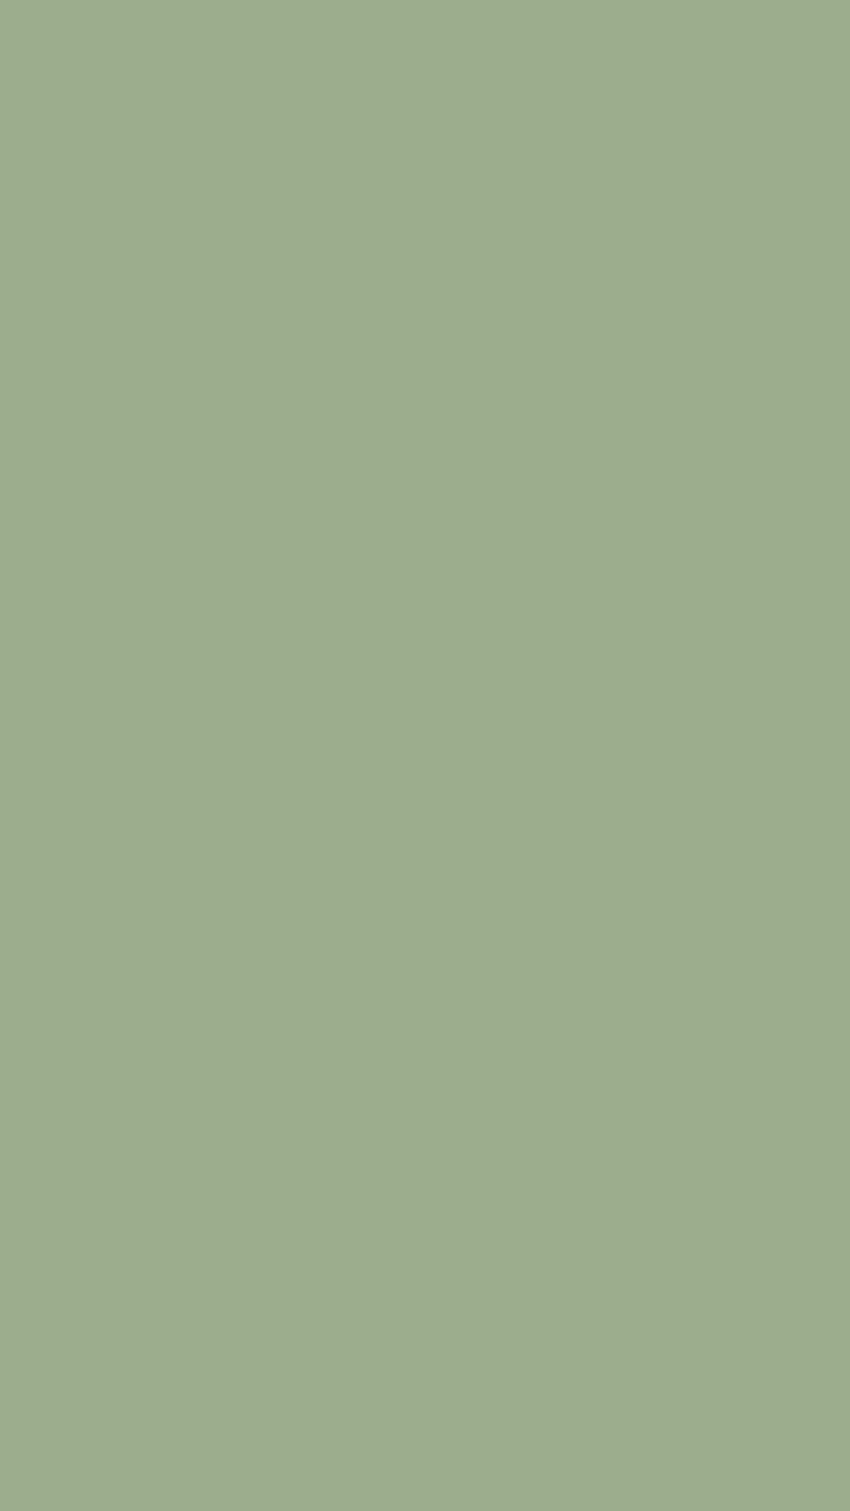  New in Sage Green aesthetic home screen app icons  sage green  aesthetic wallpapers to match them  The Aesthetic Shop